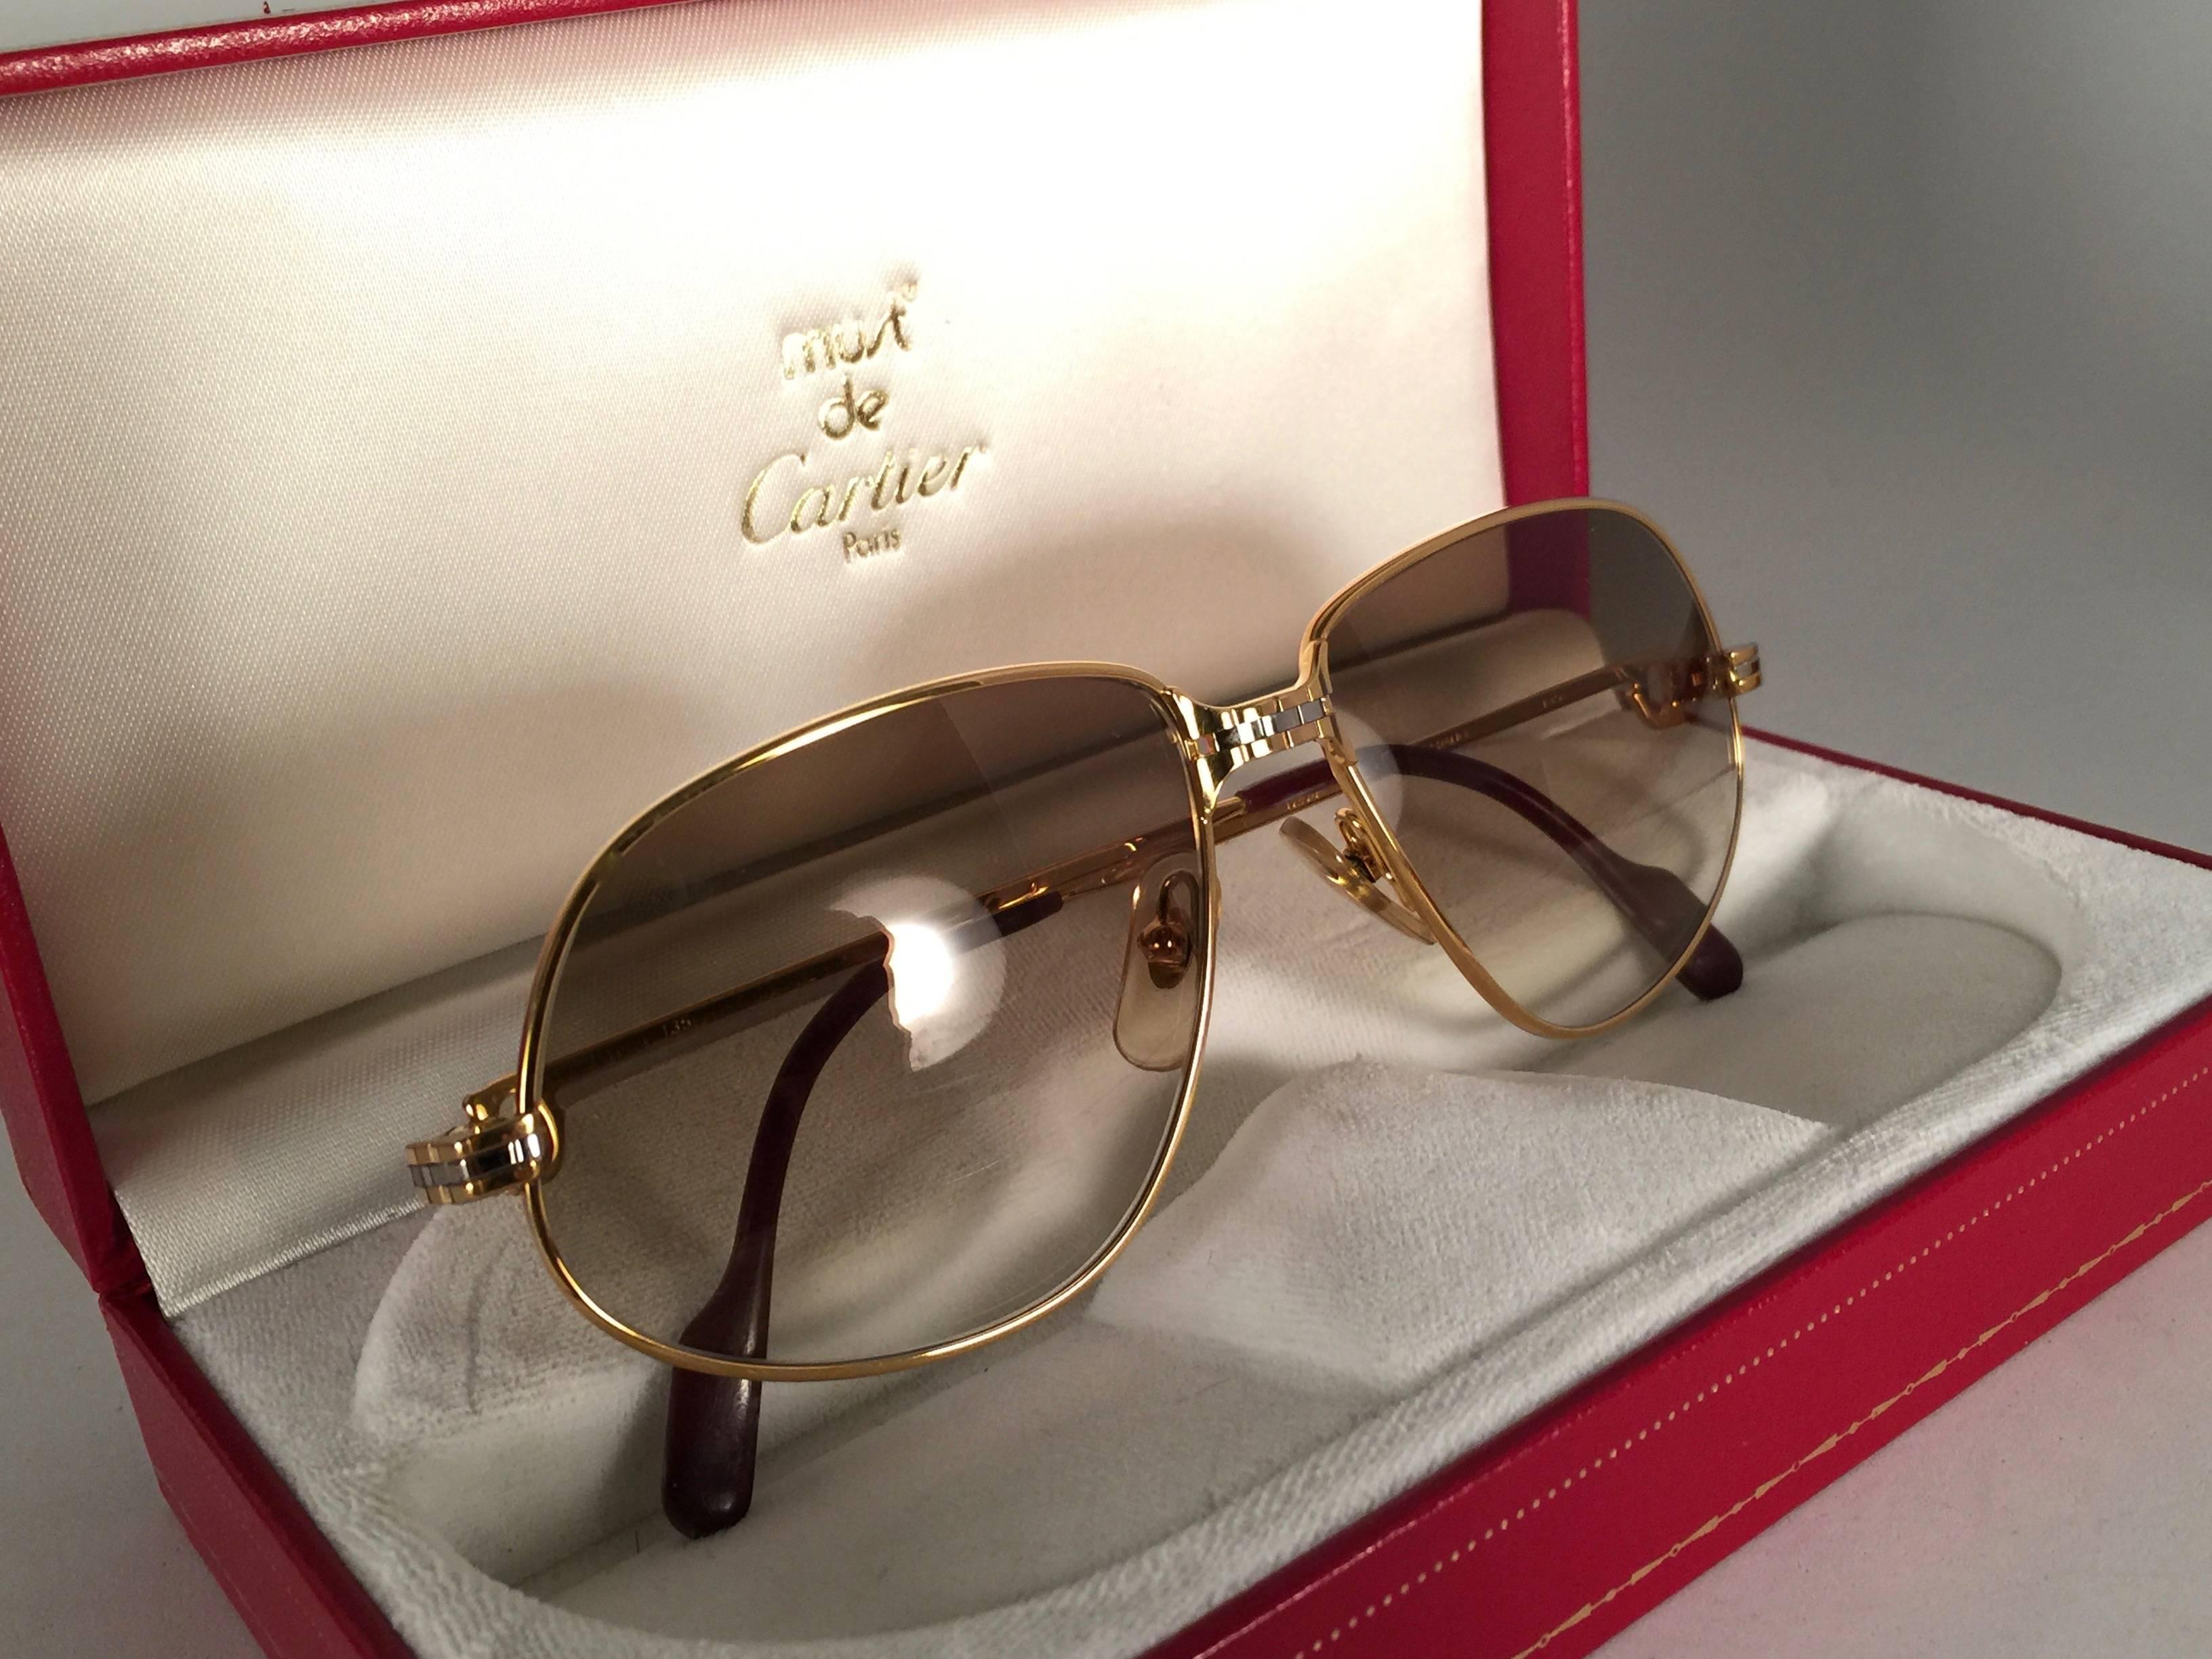 Vintage 1988 Cartier Panthere sunglasses with brown gradient (uv protection) lenses.  Frame is with the front and sides in yellow and white gold. All hallmarks. burgundy ear paddles. 
Both arms sport the C from Cartier on the temple. 
These are like